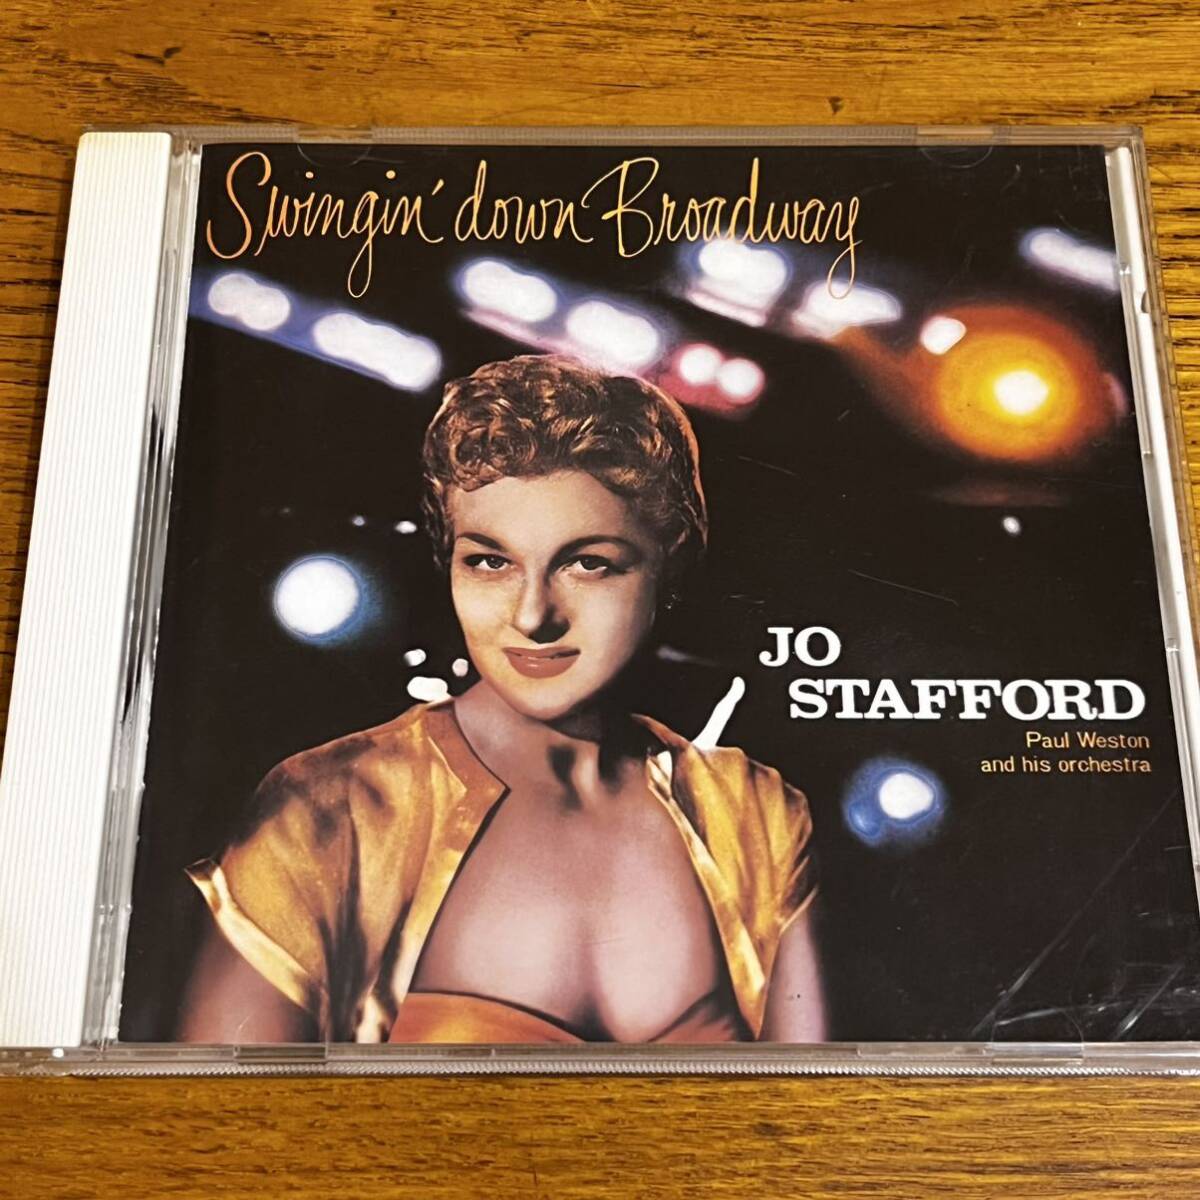 CD with belt Joe * staff .-doJO STAFFORD SWINGIN* DOWN BROADWAY Japanese explanation equipped disk excellent 